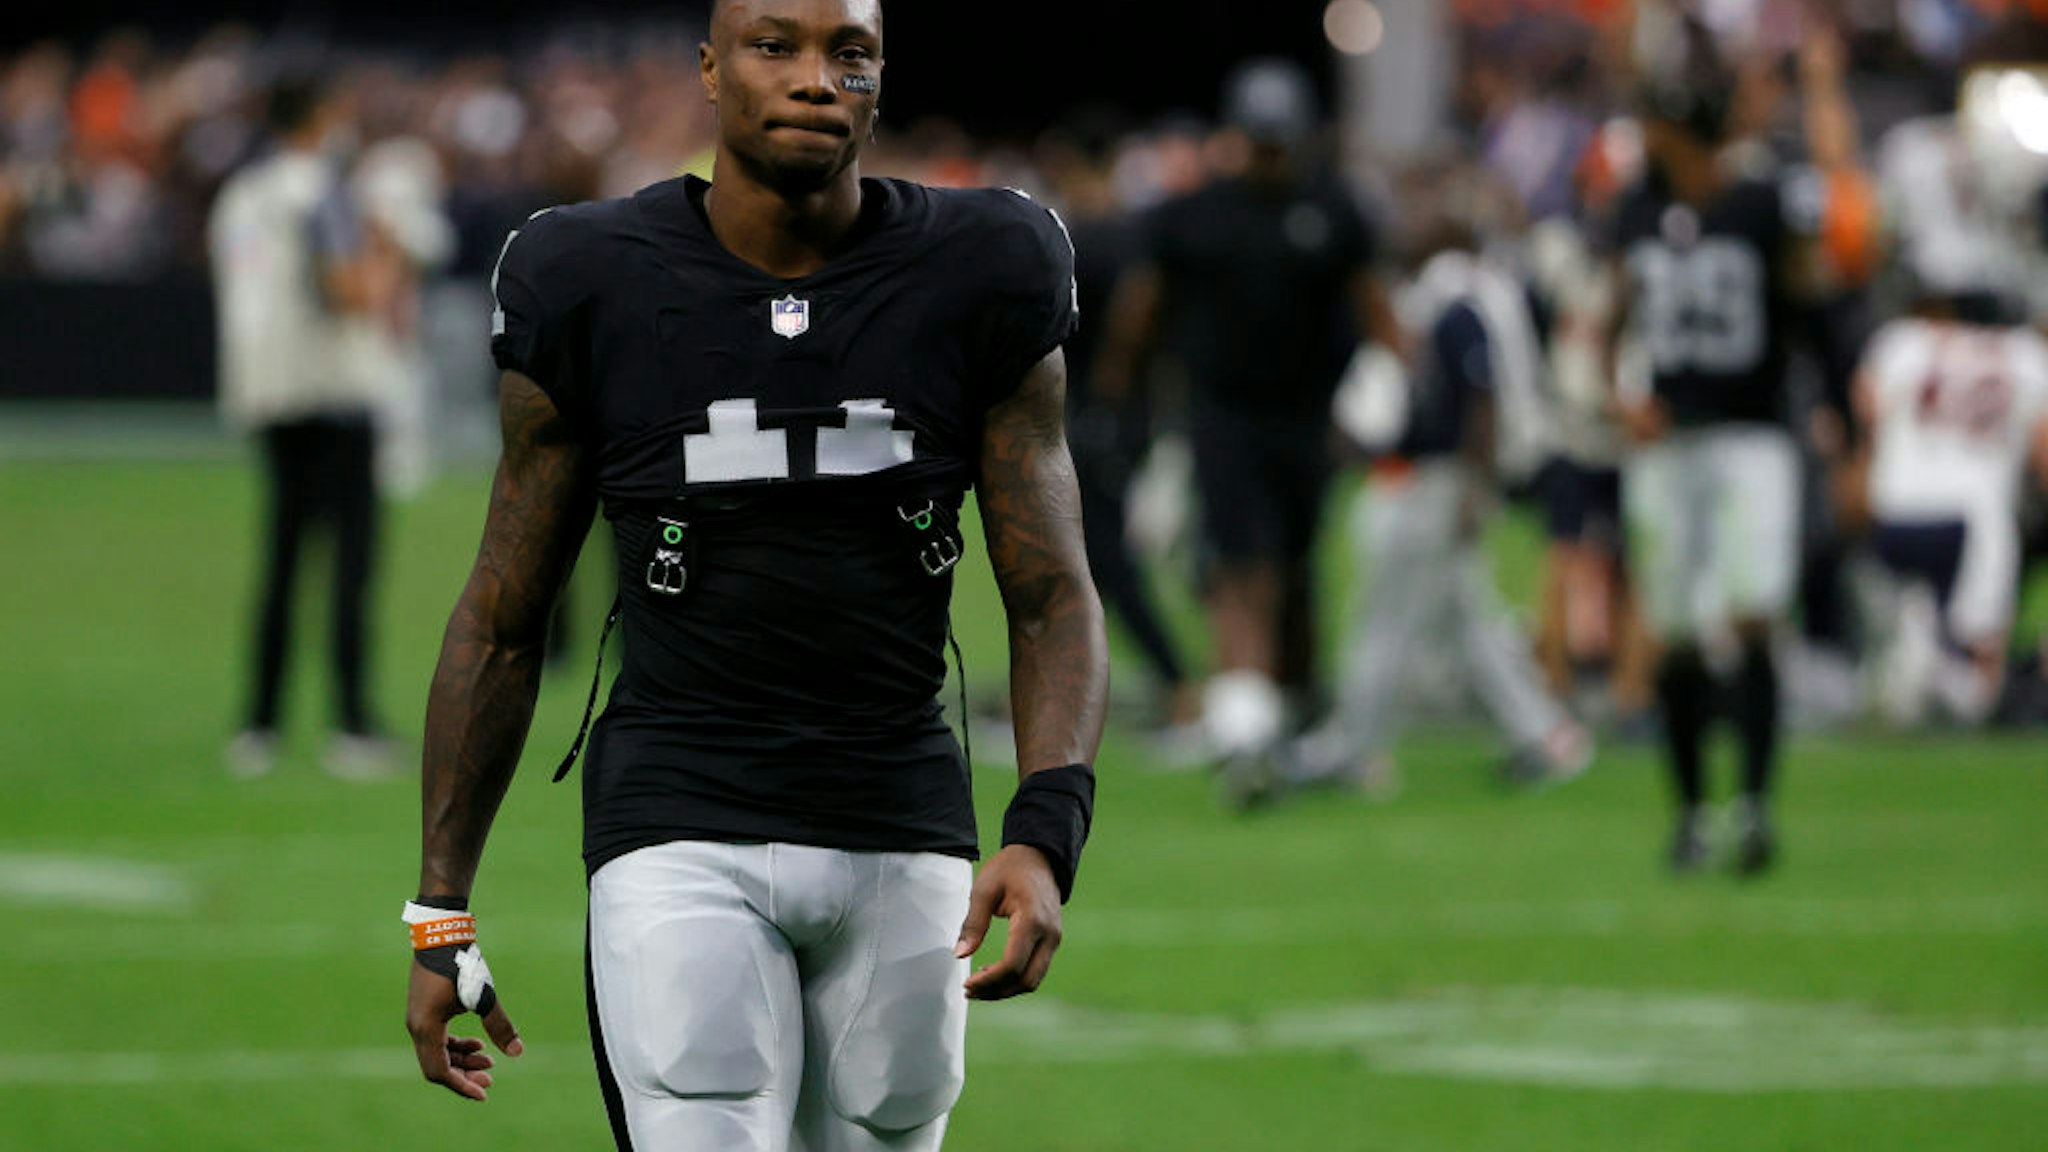 LAS VEGAS, NEVADA - OCTOBER 10: Wide receiver Henry Ruggs III #11 of the Las Vegas Raiders walks off the field after the team's 20-9 loss to the Chicago Bears at Allegiant Stadium on October 10, 2021 in Las Vegas, Nevada. (Photo by Ethan Miller/Getty Images)